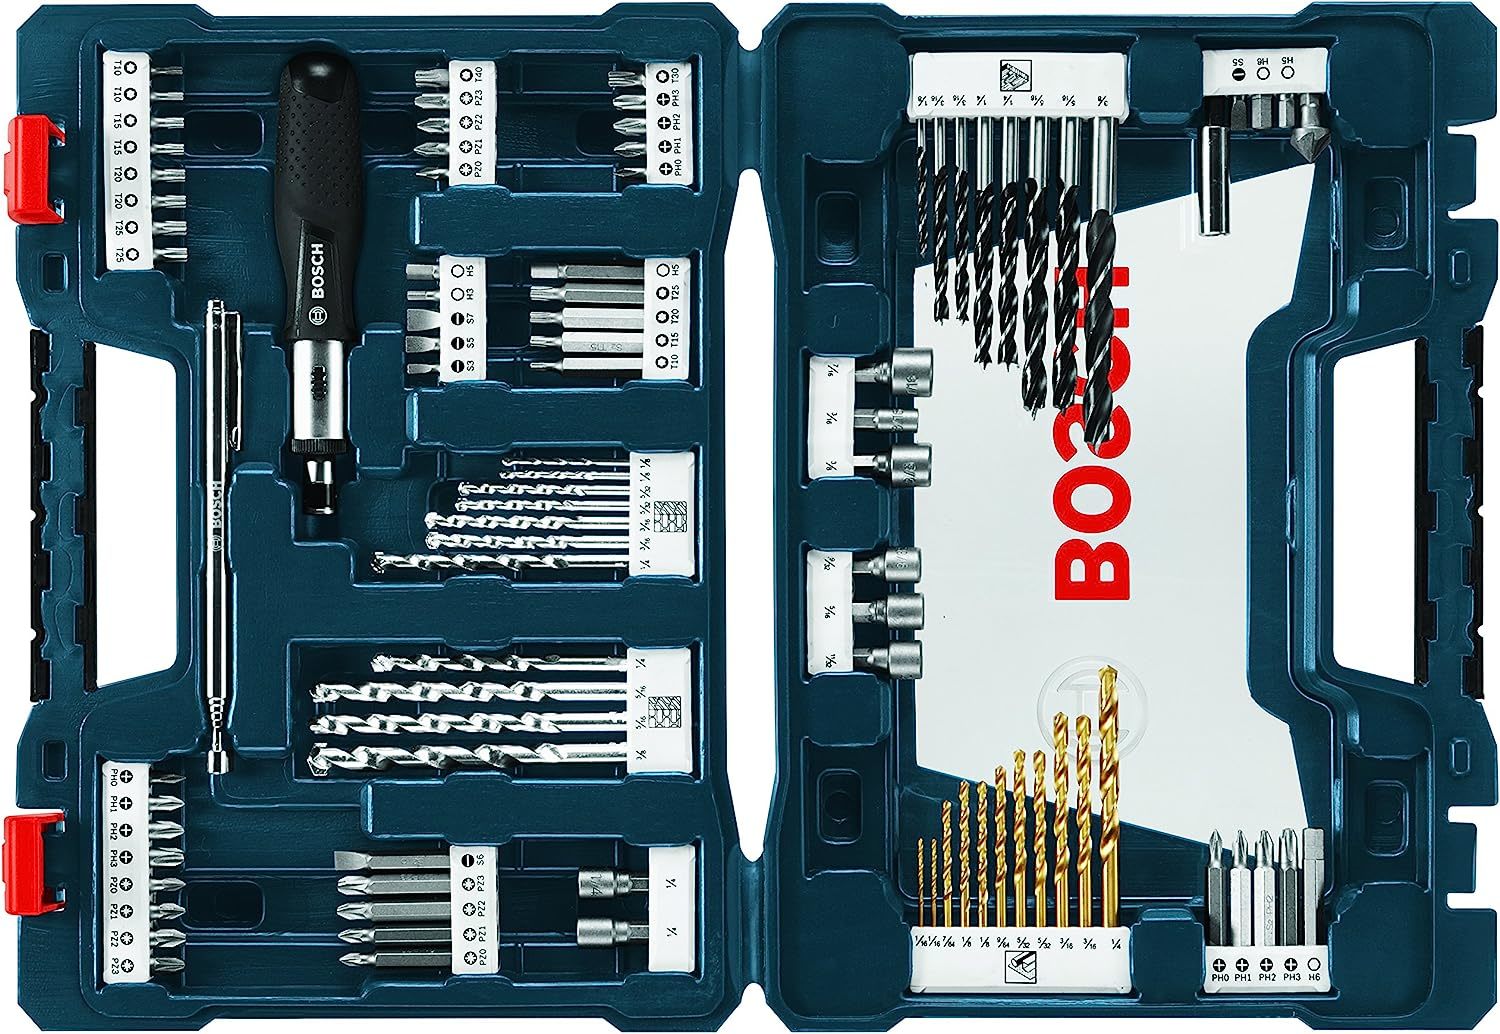 Primary image for The 91-Piece Bosch Ms4091 Drilling And Driving Mixed Set.